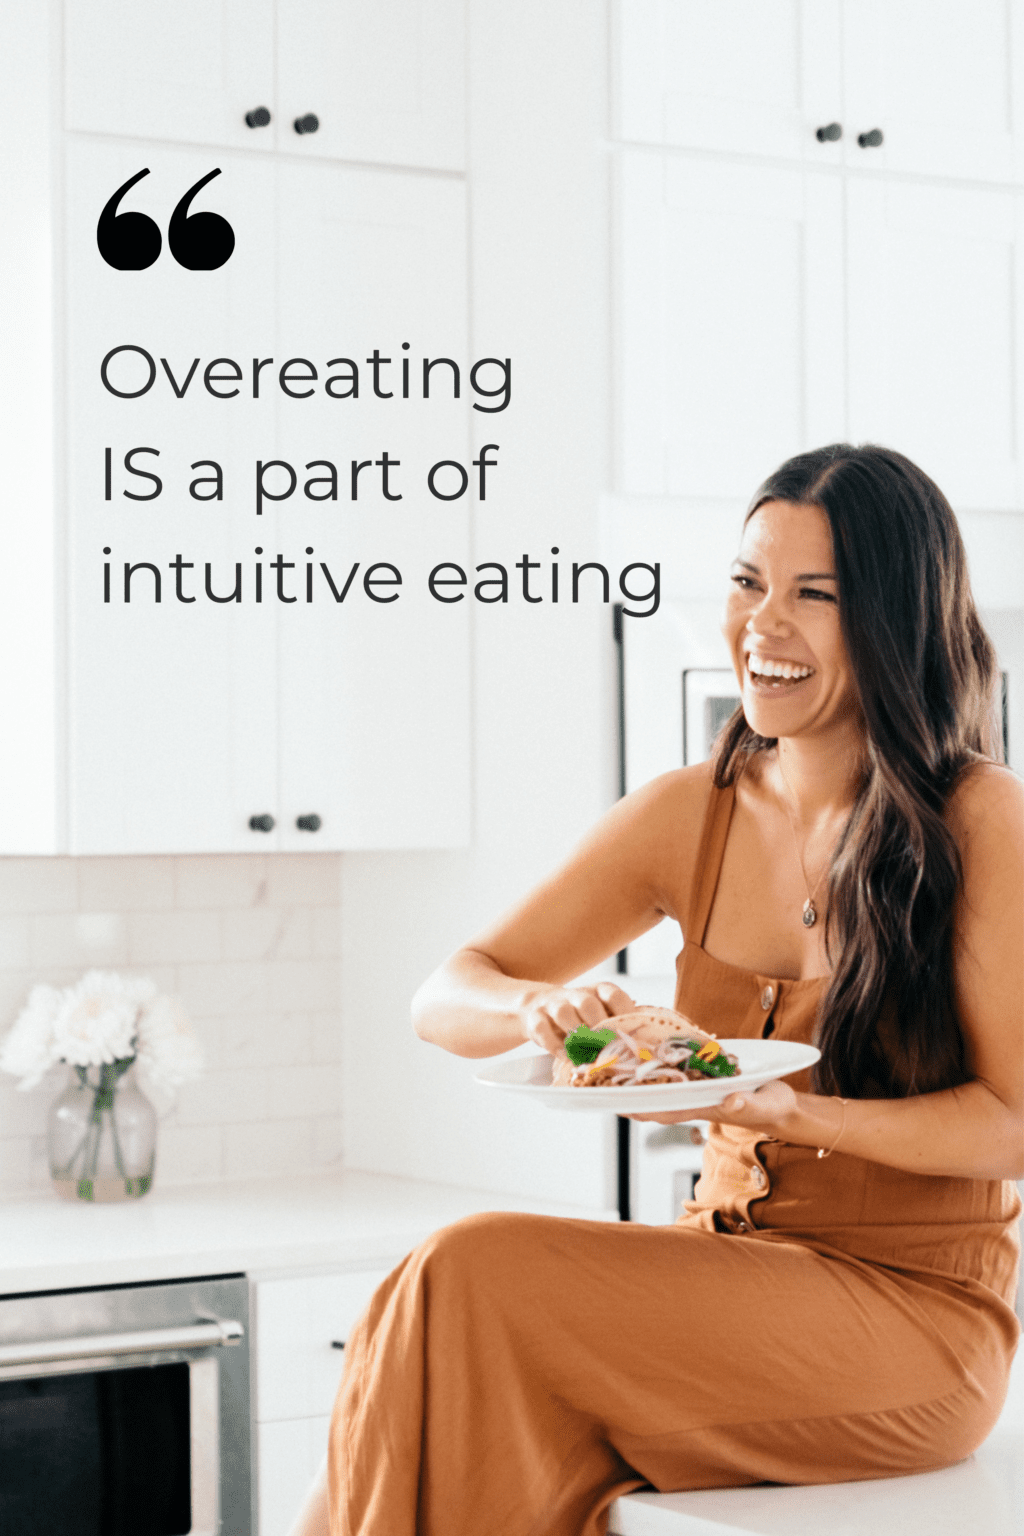 A woman with black hair is sitting on a counter in a brown dress. She is in a white kitchen eating a taco. There is text overlay to the left of the girl that reads "overeating is a part of intuitive eating".